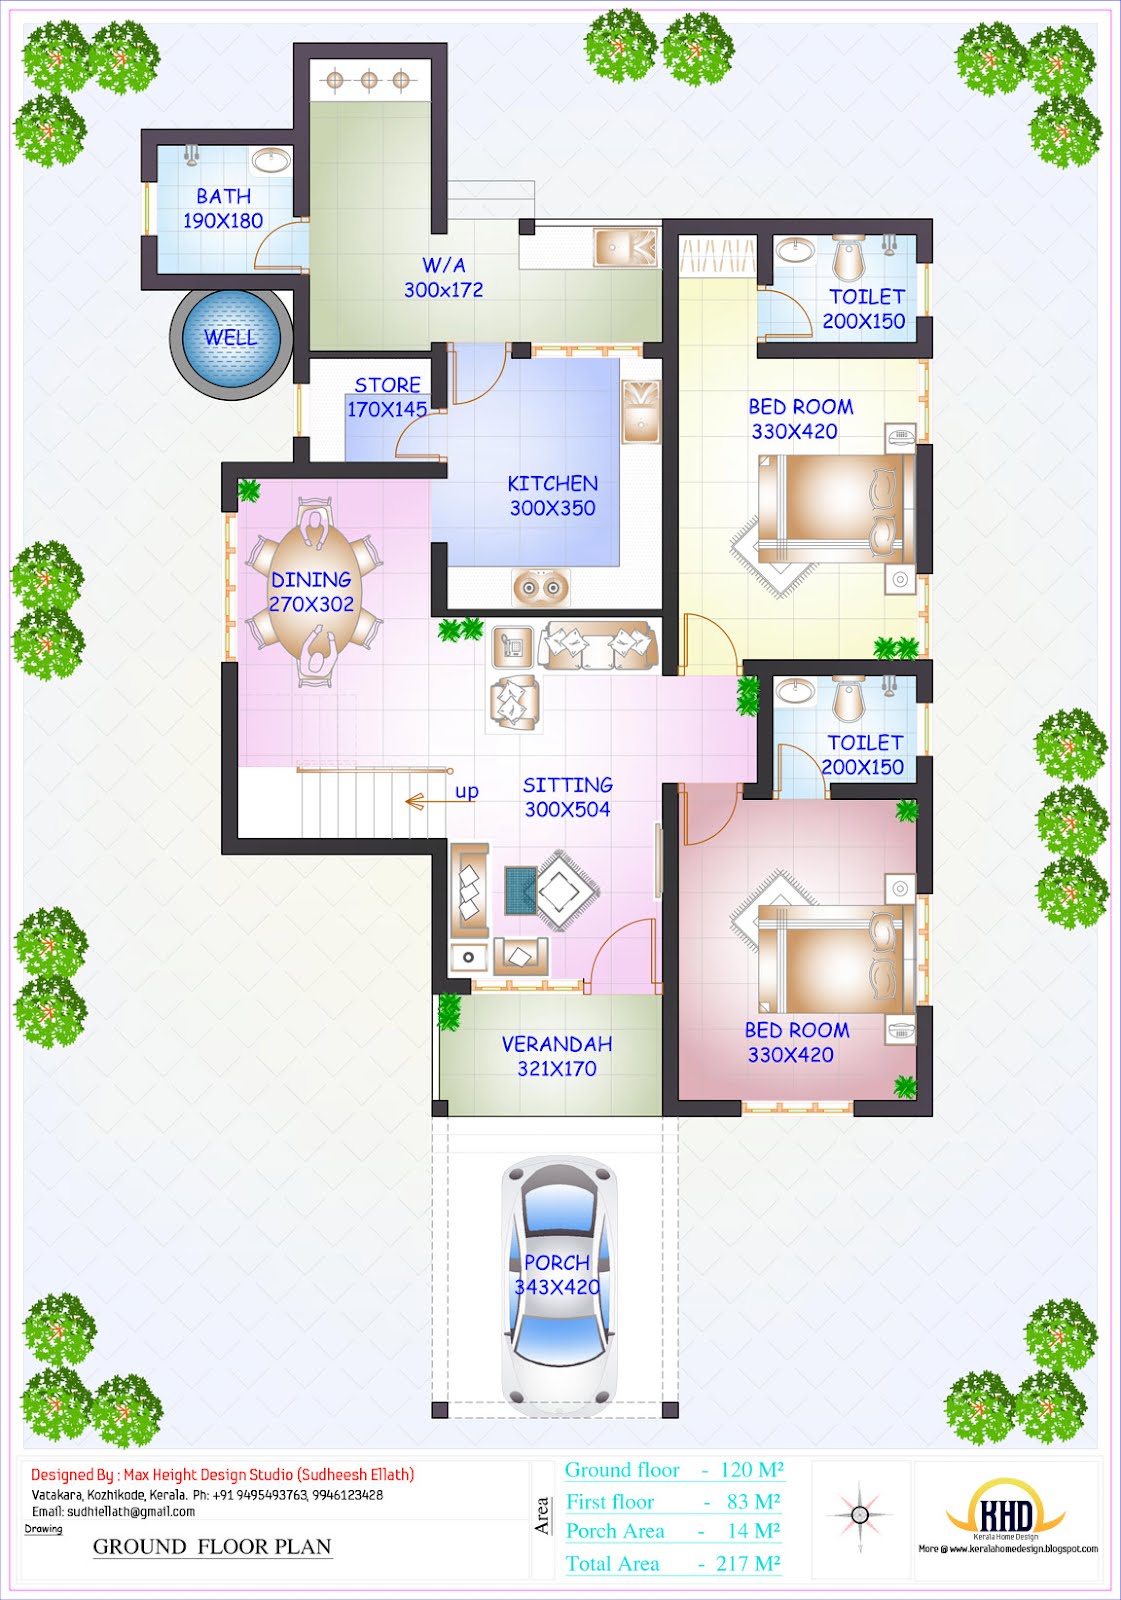 Floor plan and elevation of 2336 sq.feet, 4 bedroom house ...